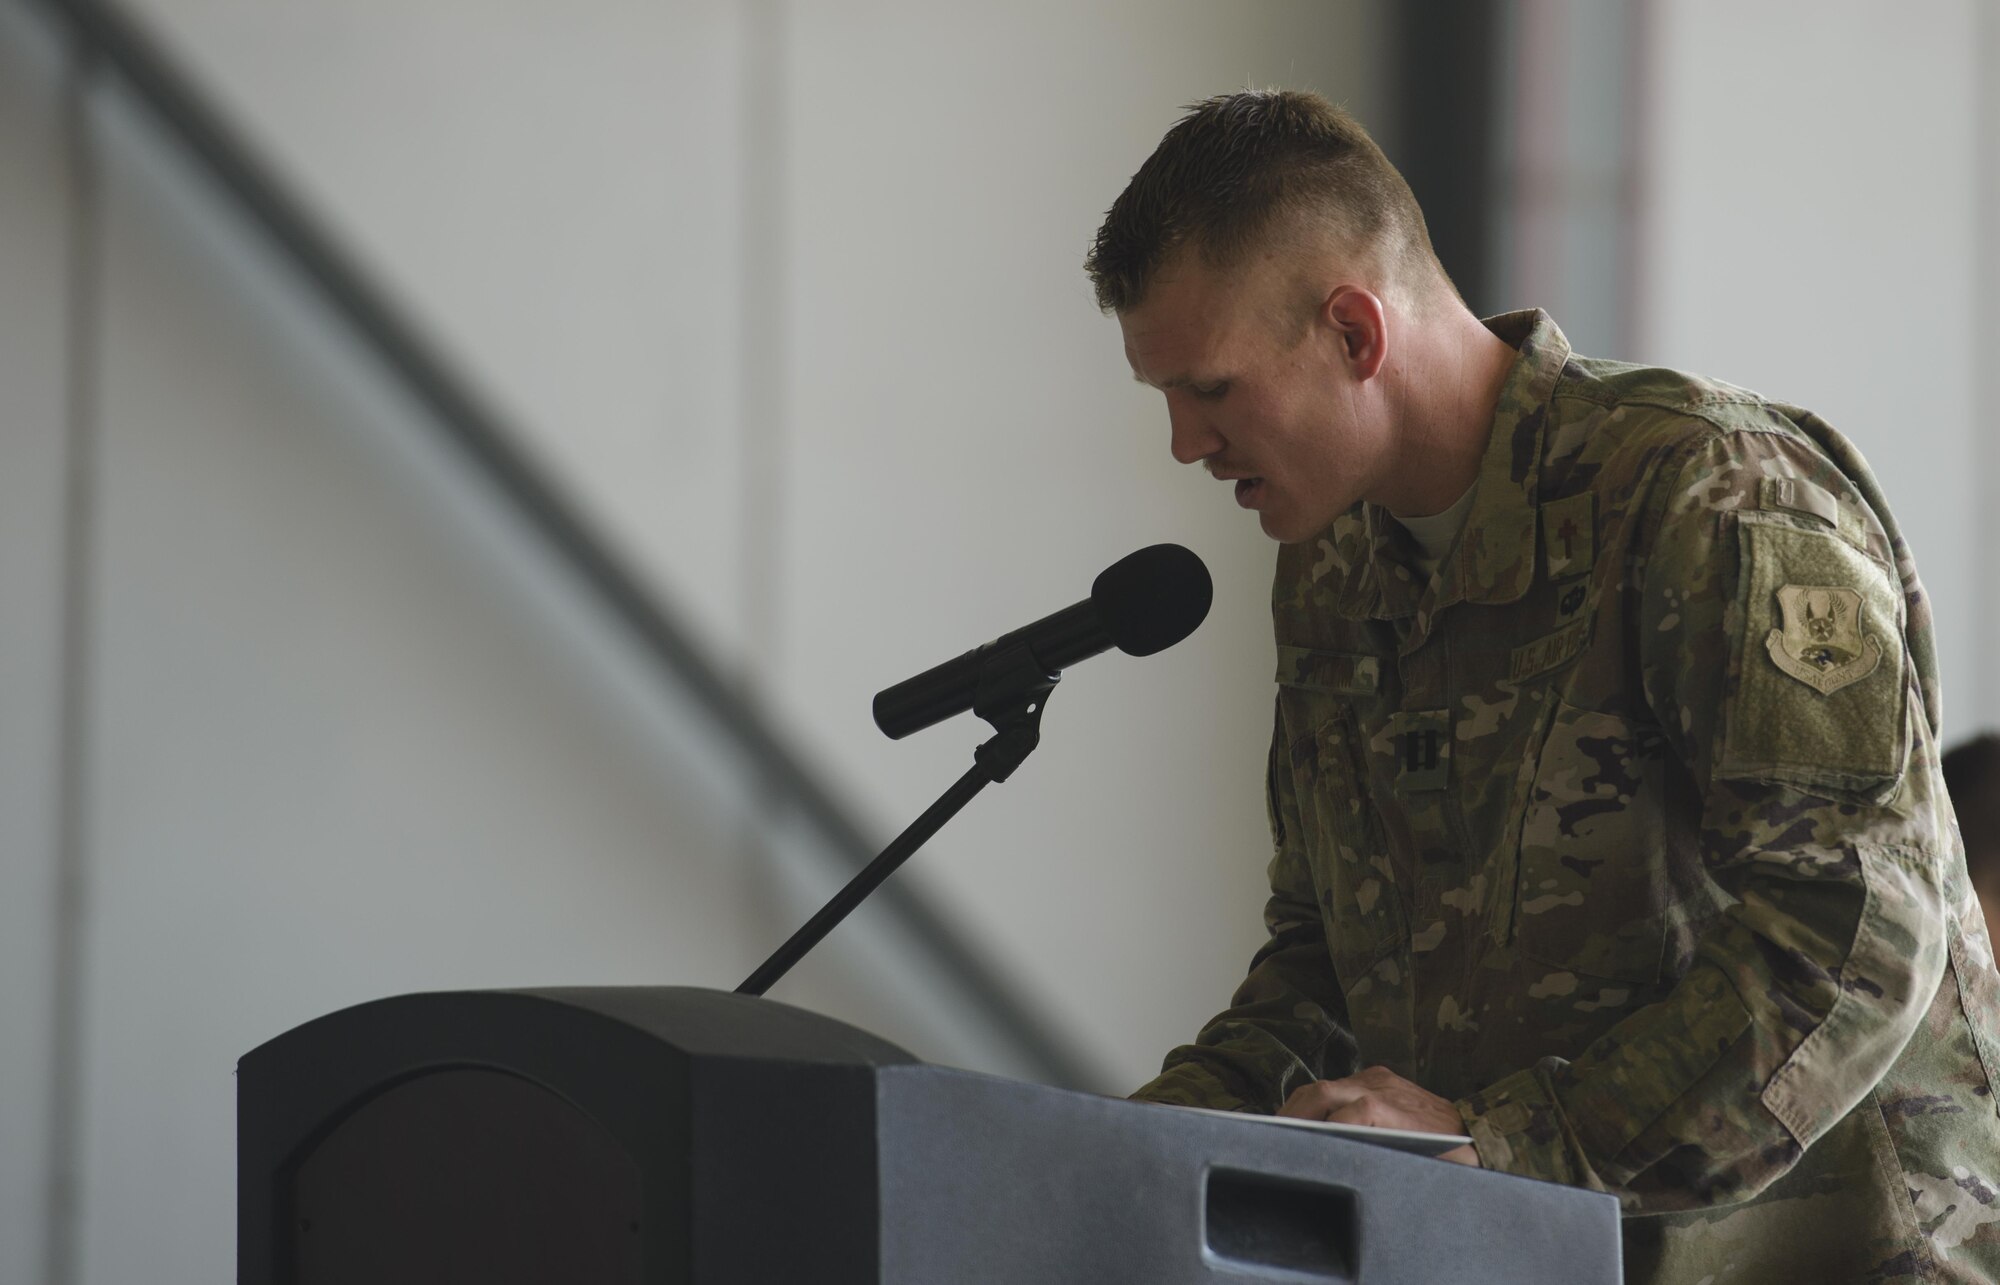 Chaplain (Capt.) Joshua Flynn, 455th Air Expeditionary Wing, delivers an invocation during a ceremony at Bagram Airfield, Afghanistan, July 14, 2017. Religious support teams from the 455th AEW travel throughout Afghanistan to accommodate the spiritual needs of service members and coalition forces. (U.S. Air Force photo by Staff Sgt. Benjamin Gonsier)